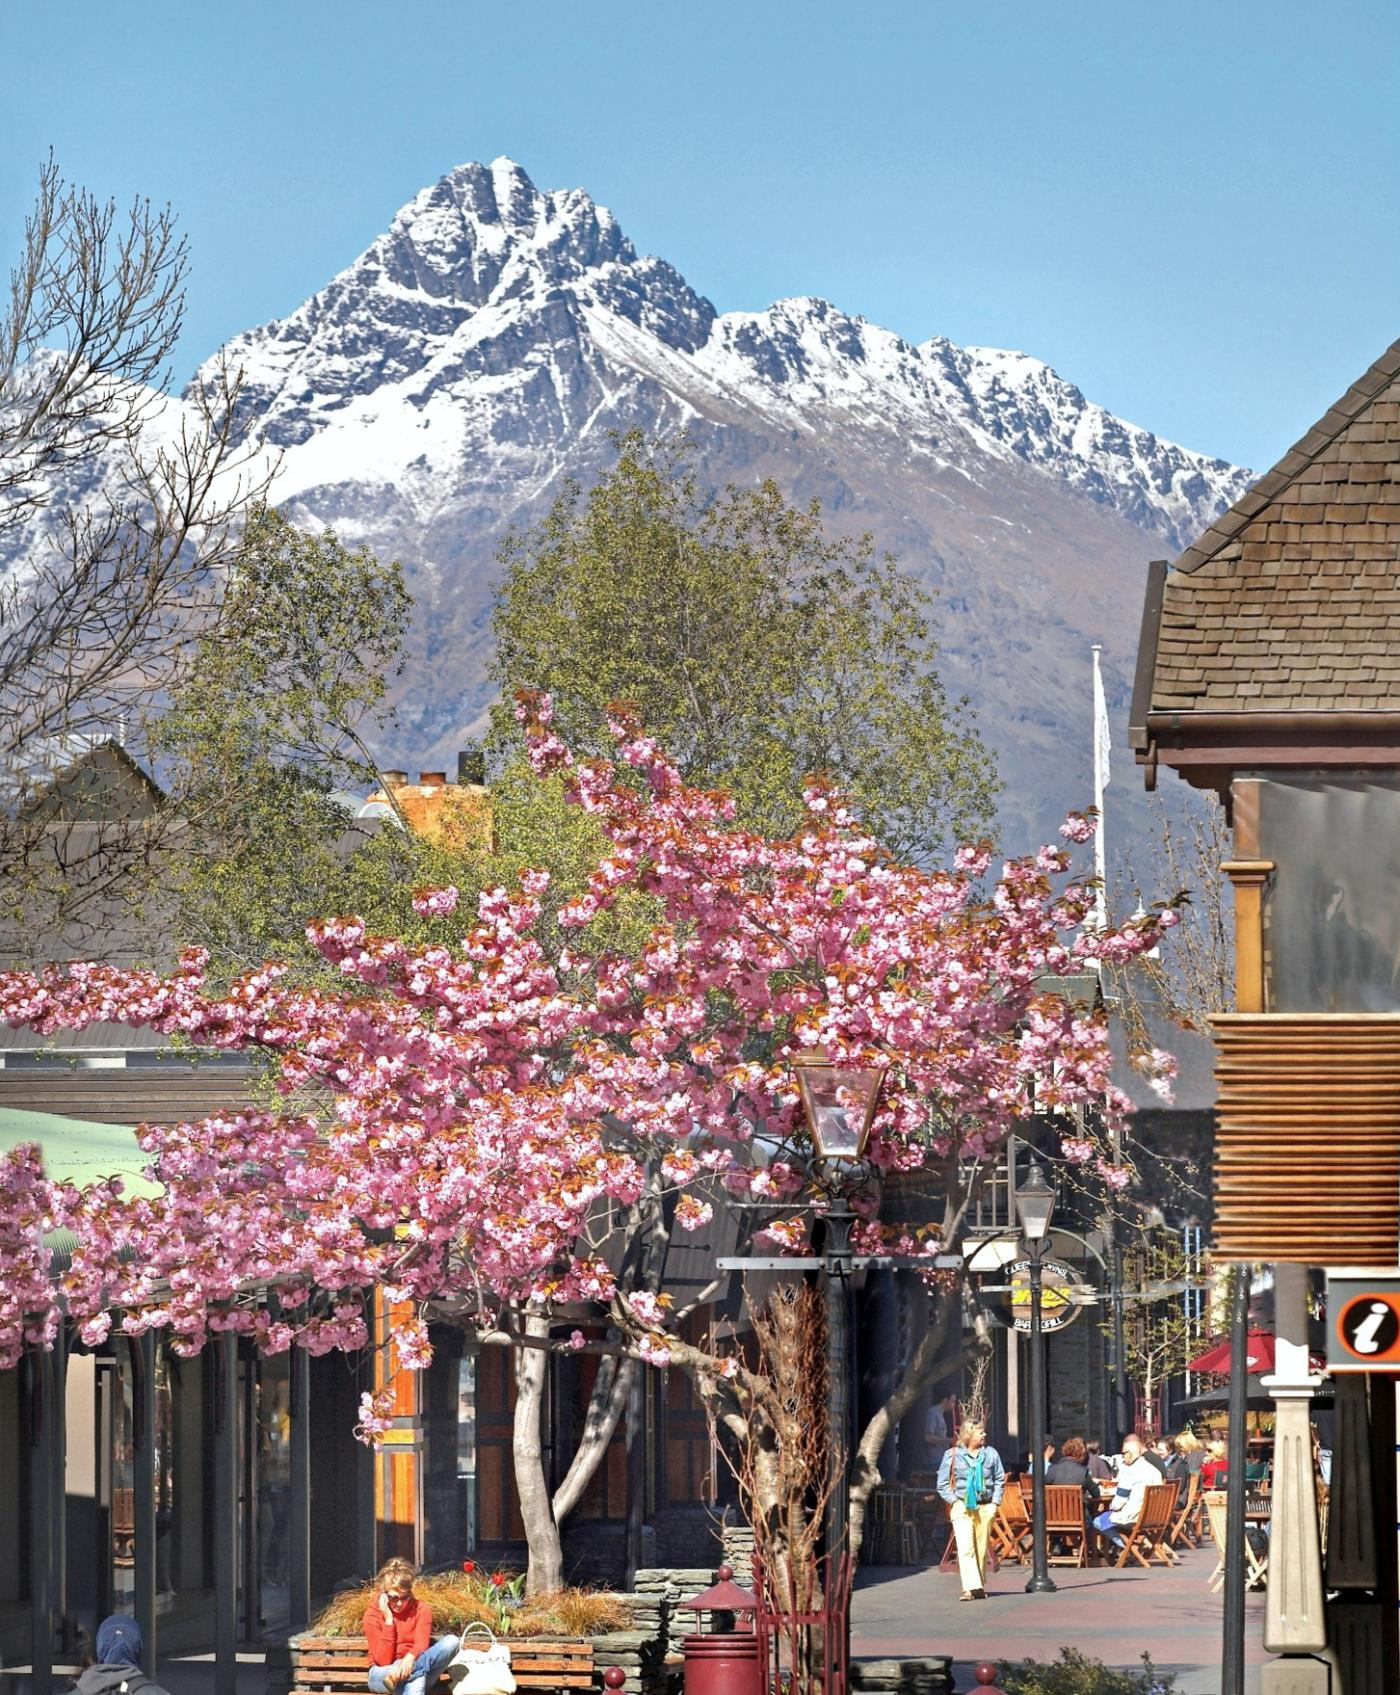 Queenstown Mall in spring with cherry blossoms and snow covered mountain in the background